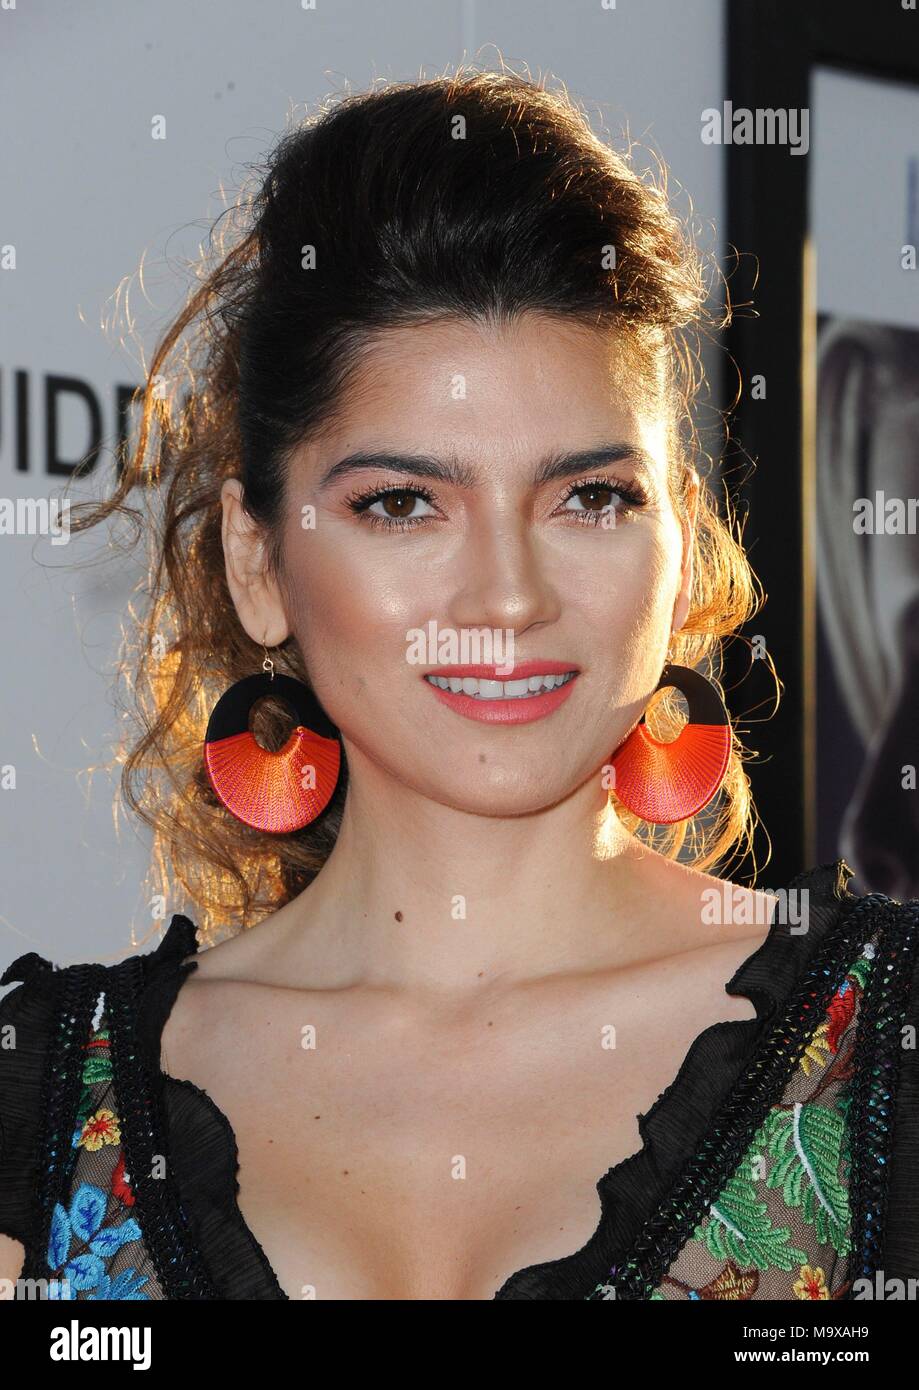 Los Angeles, CA, USA. 28th Mar, 2018. Blanca Blanco at arrivals for CHAPPAQUIDDICK Premiere, Samuel Goldwyn Theater, Los Angeles, CA March 28, 2018. Credit: Elizabeth Goodenough/Everett Collection/Alamy Live News Stock Photo